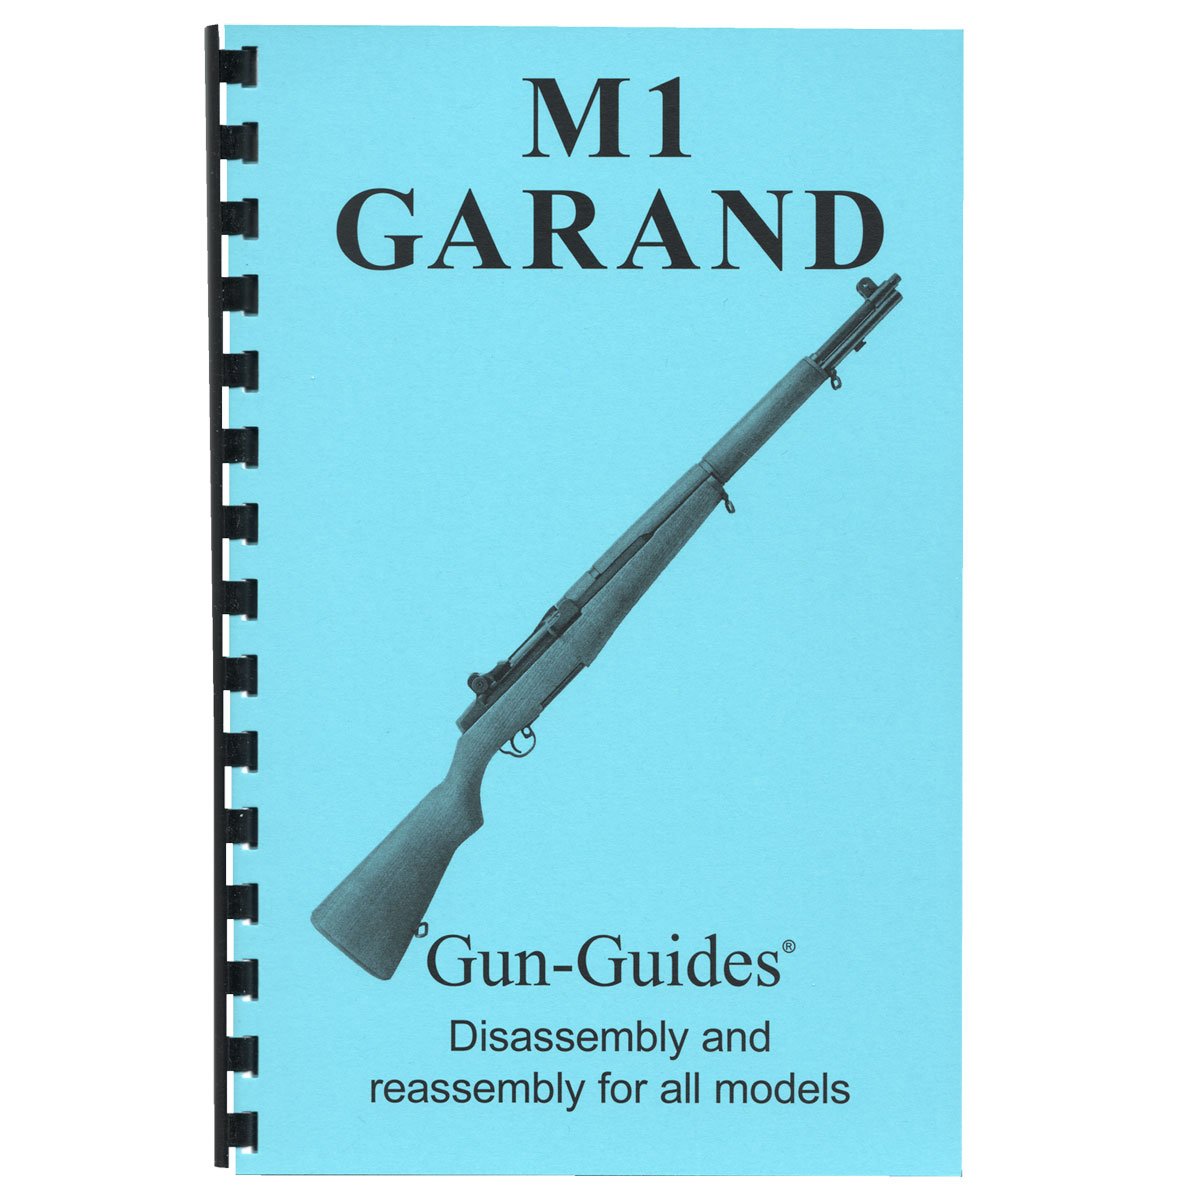 GUN-GUIDES - ASSEMBLY AND DISASSEMBLY FOR THE M1 GARAND